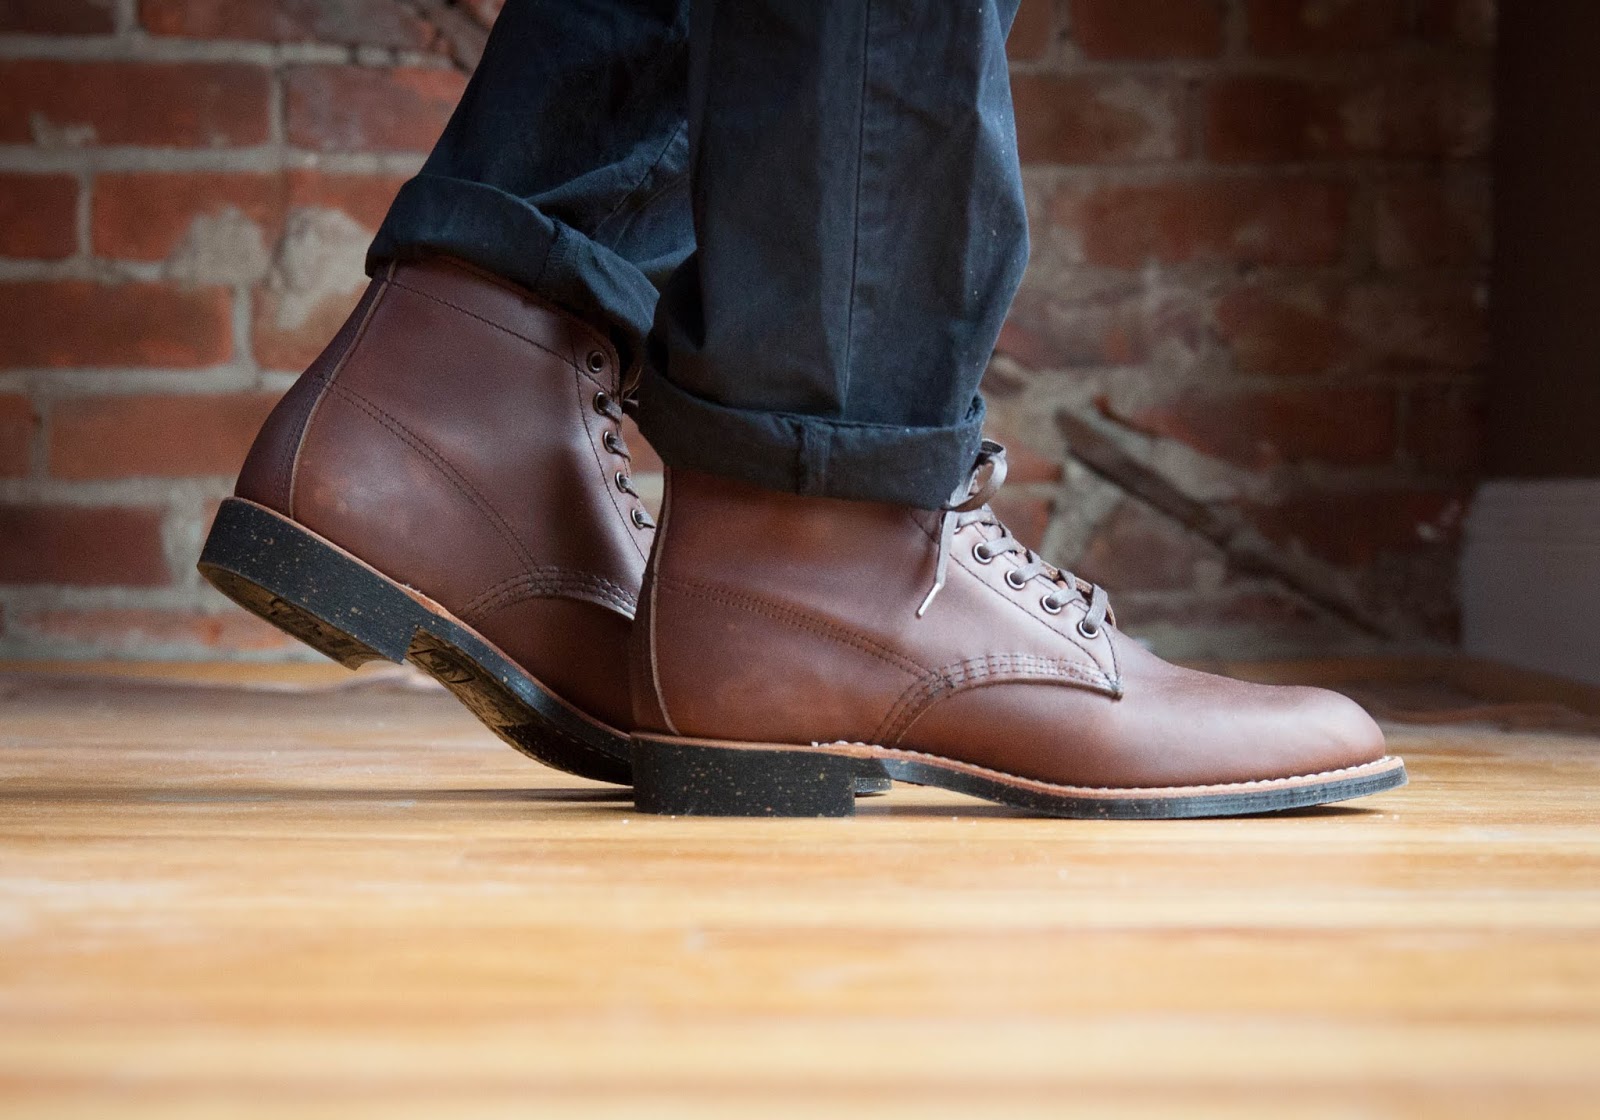 red wing merchant 8064